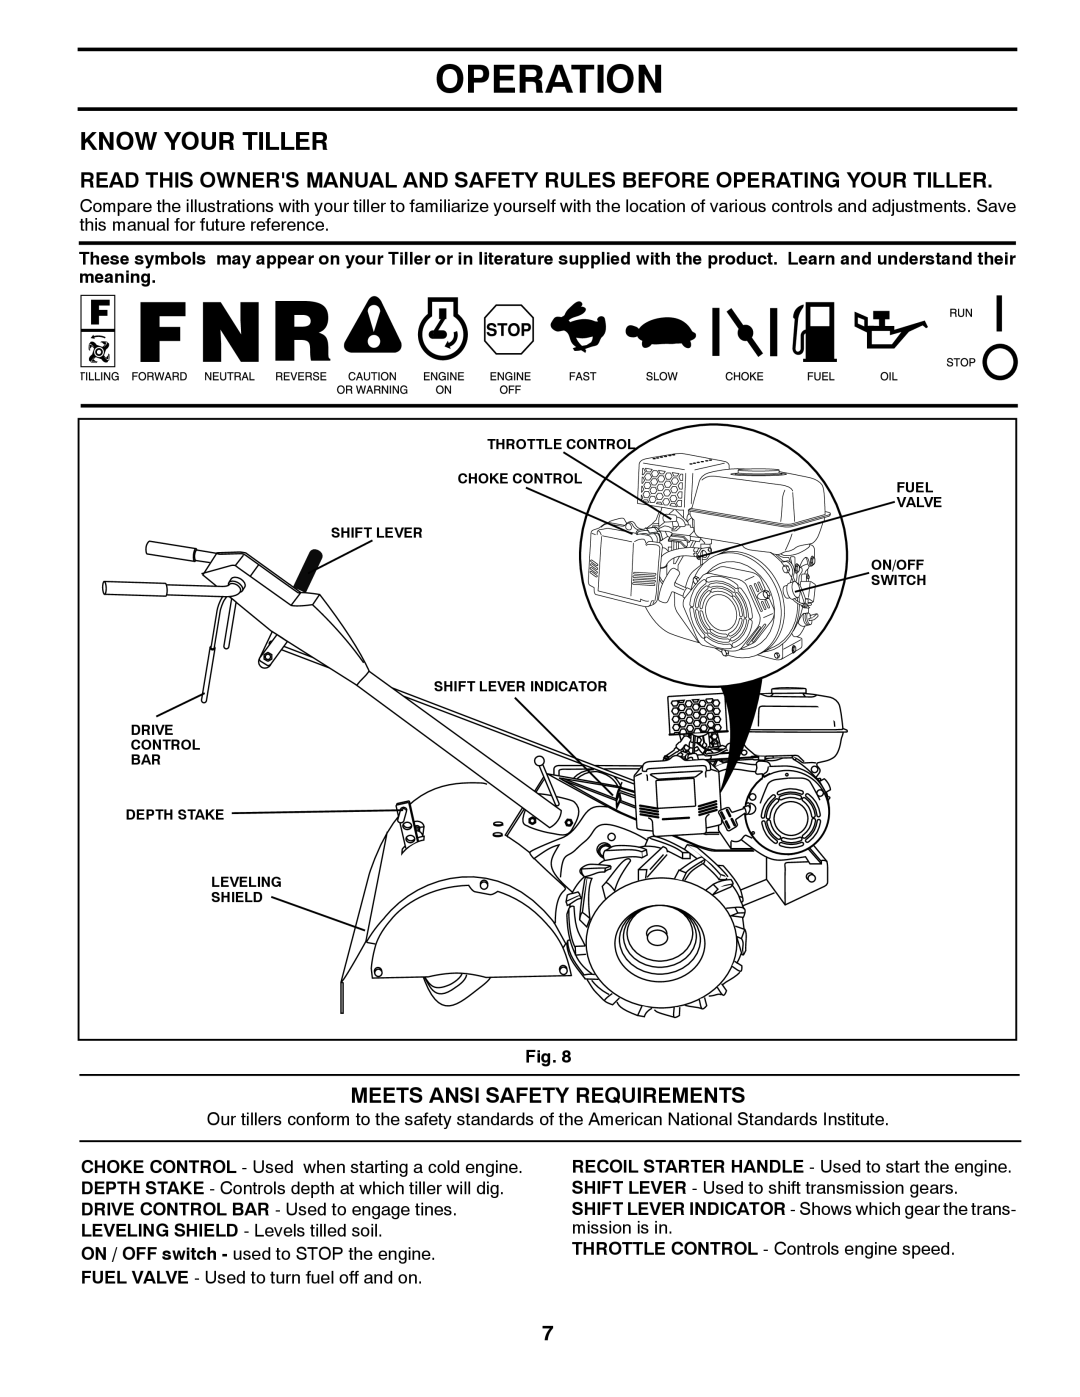 Husqvarna RTT900 owner manual Operation, Know Your Tiller, Meets Ansi Safety Requirements 